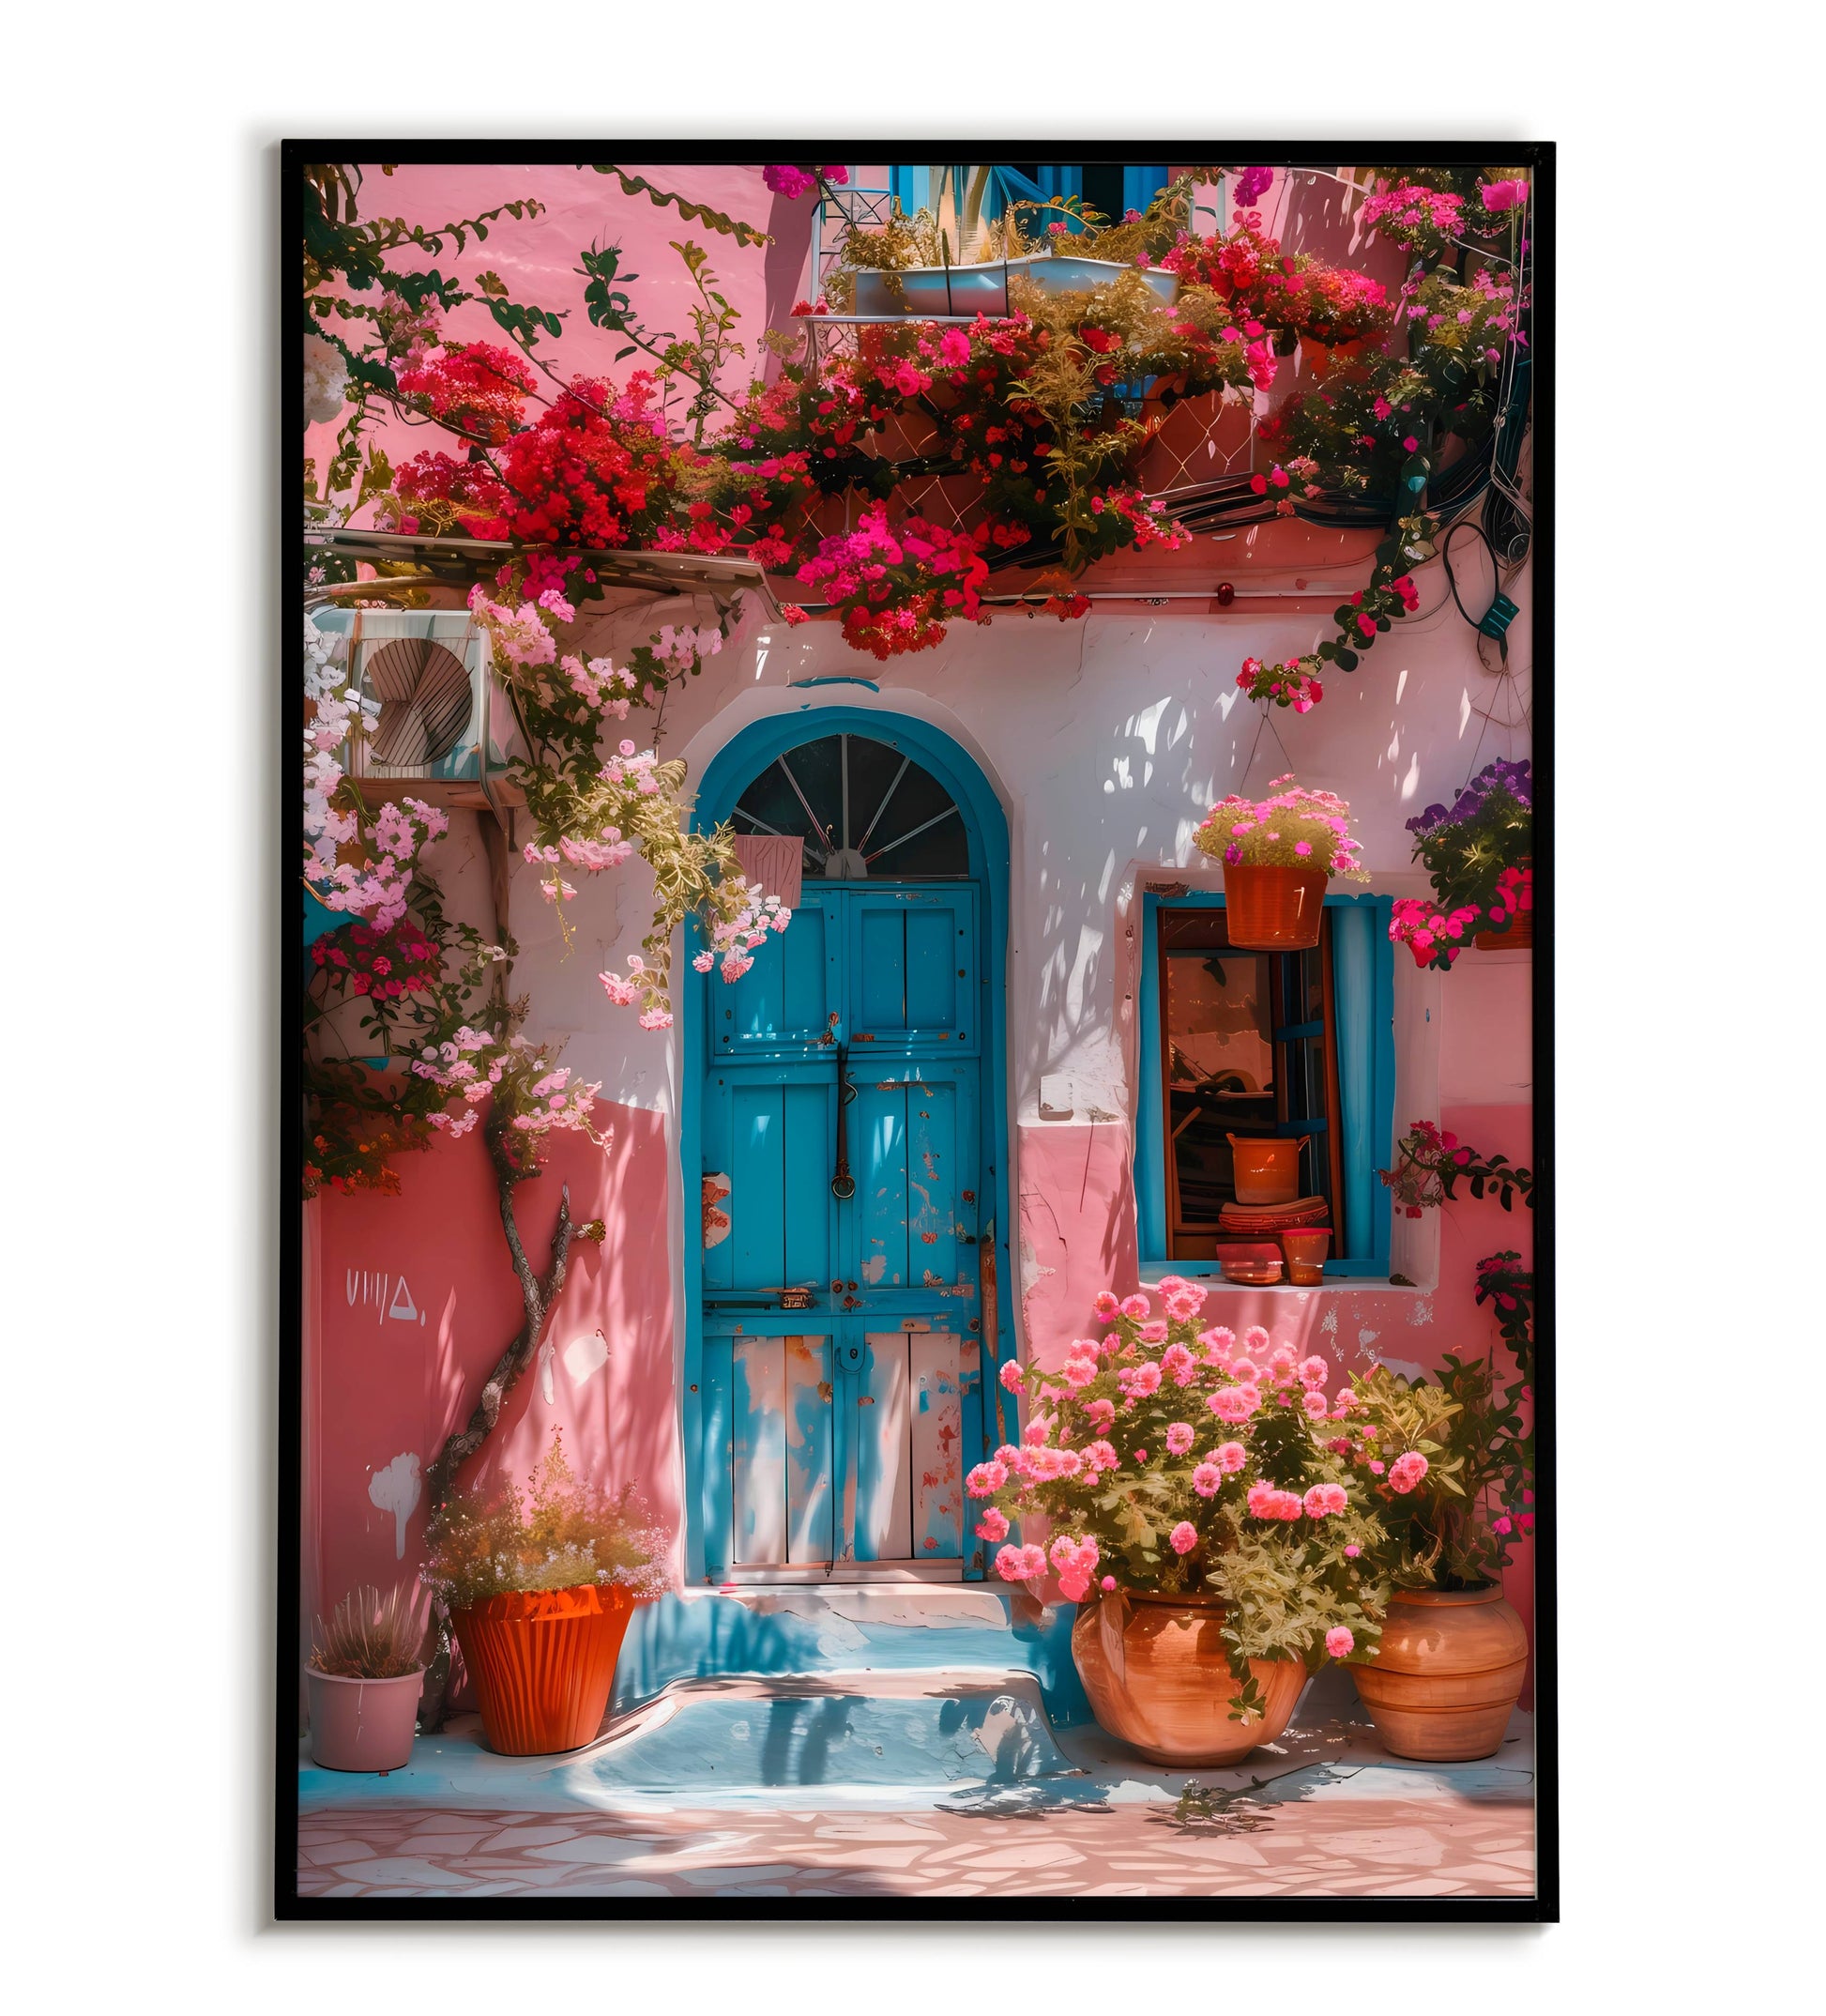 Blue Door, Pink Bougainvillea House - Printable Wall Art / Poster. Download this charming image to add a touch of Mediterranean beauty to your decor.